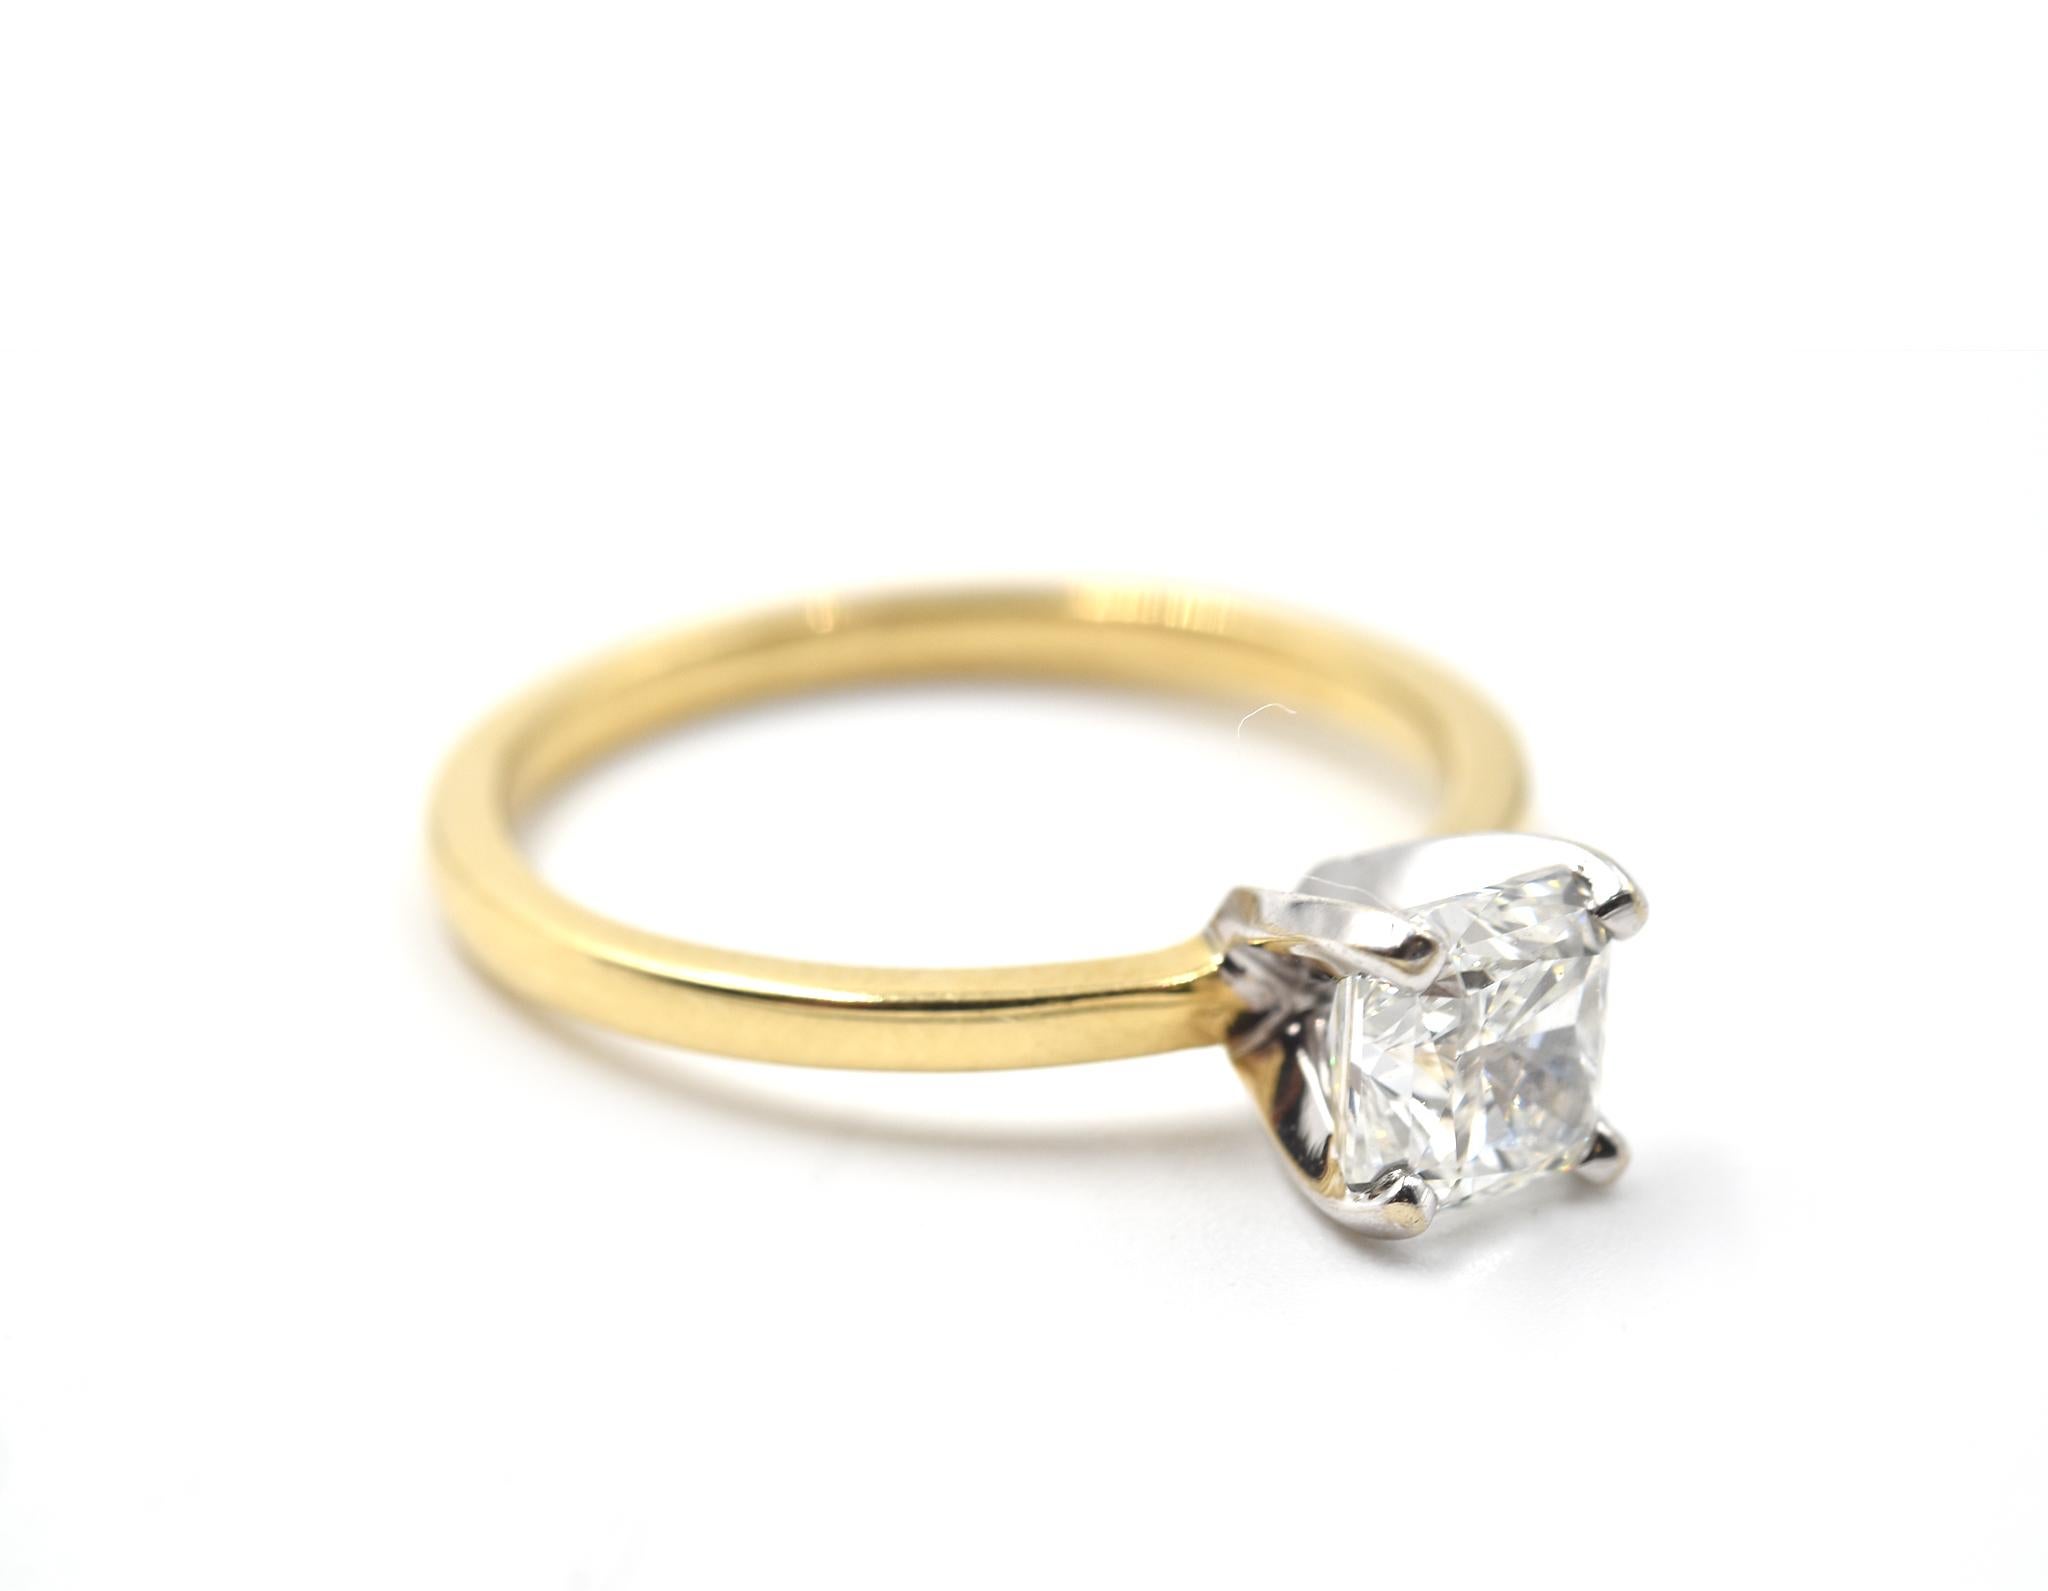 Designer: custom design
Material: 18k yellow gold
GIA Cert #: 2267134287
Center Stone: radiant cut 1.02 carat diamond
Color: H
Clarity: VS1
Ring Size: 6 1/2 (please allow two additional shipping days for sizing requests)
Weight: 2.76 grams
